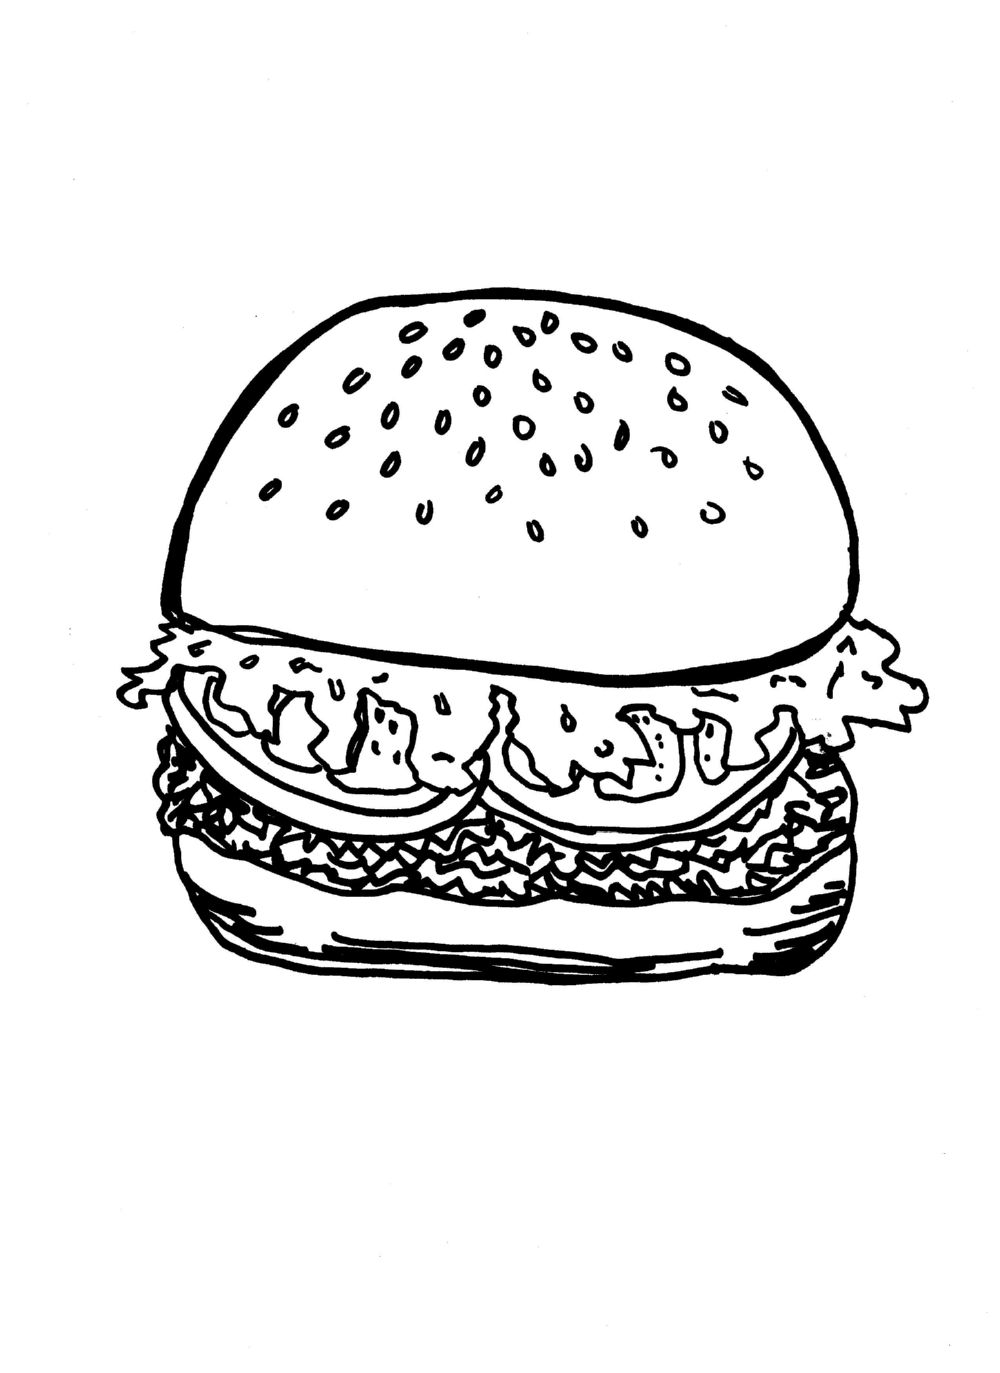 Lettuce On A Burger Coloring Page